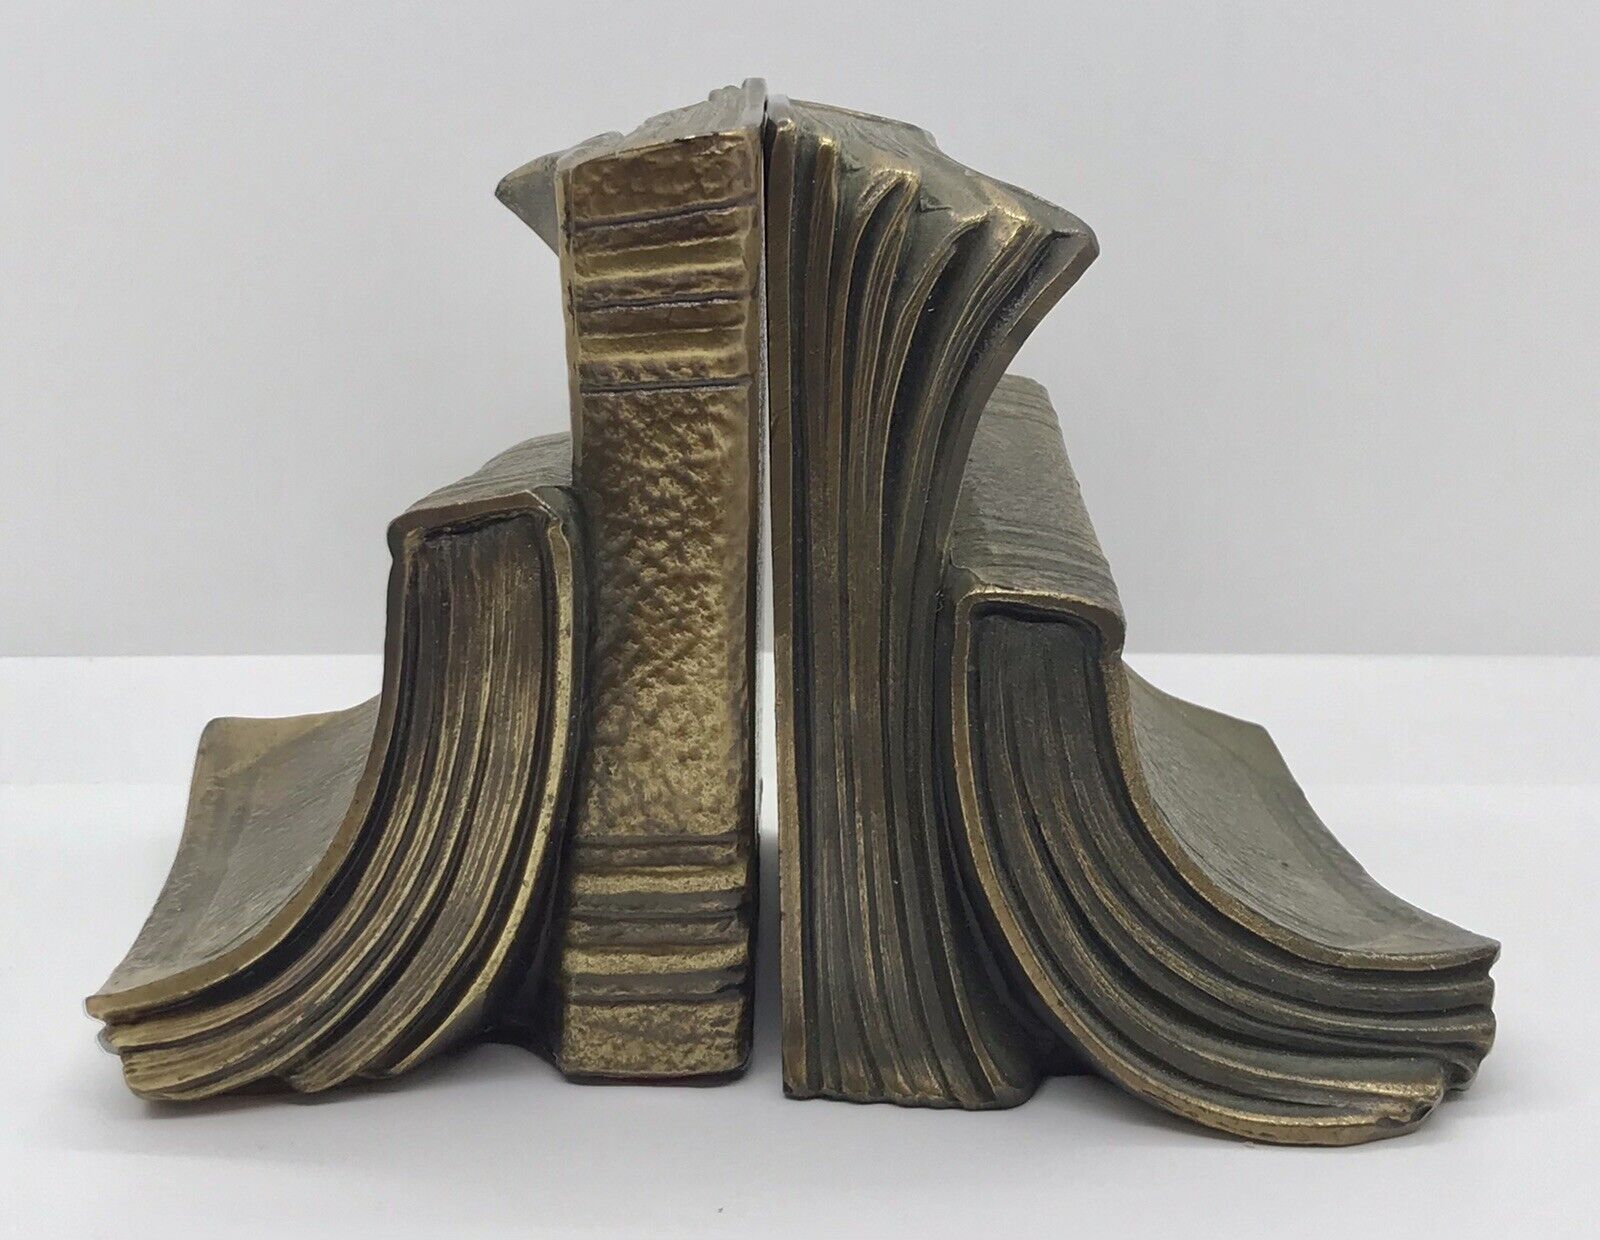 Vintage Pair of Brass Book-Themed Bookends • Philadelphia Manufacturing Co.